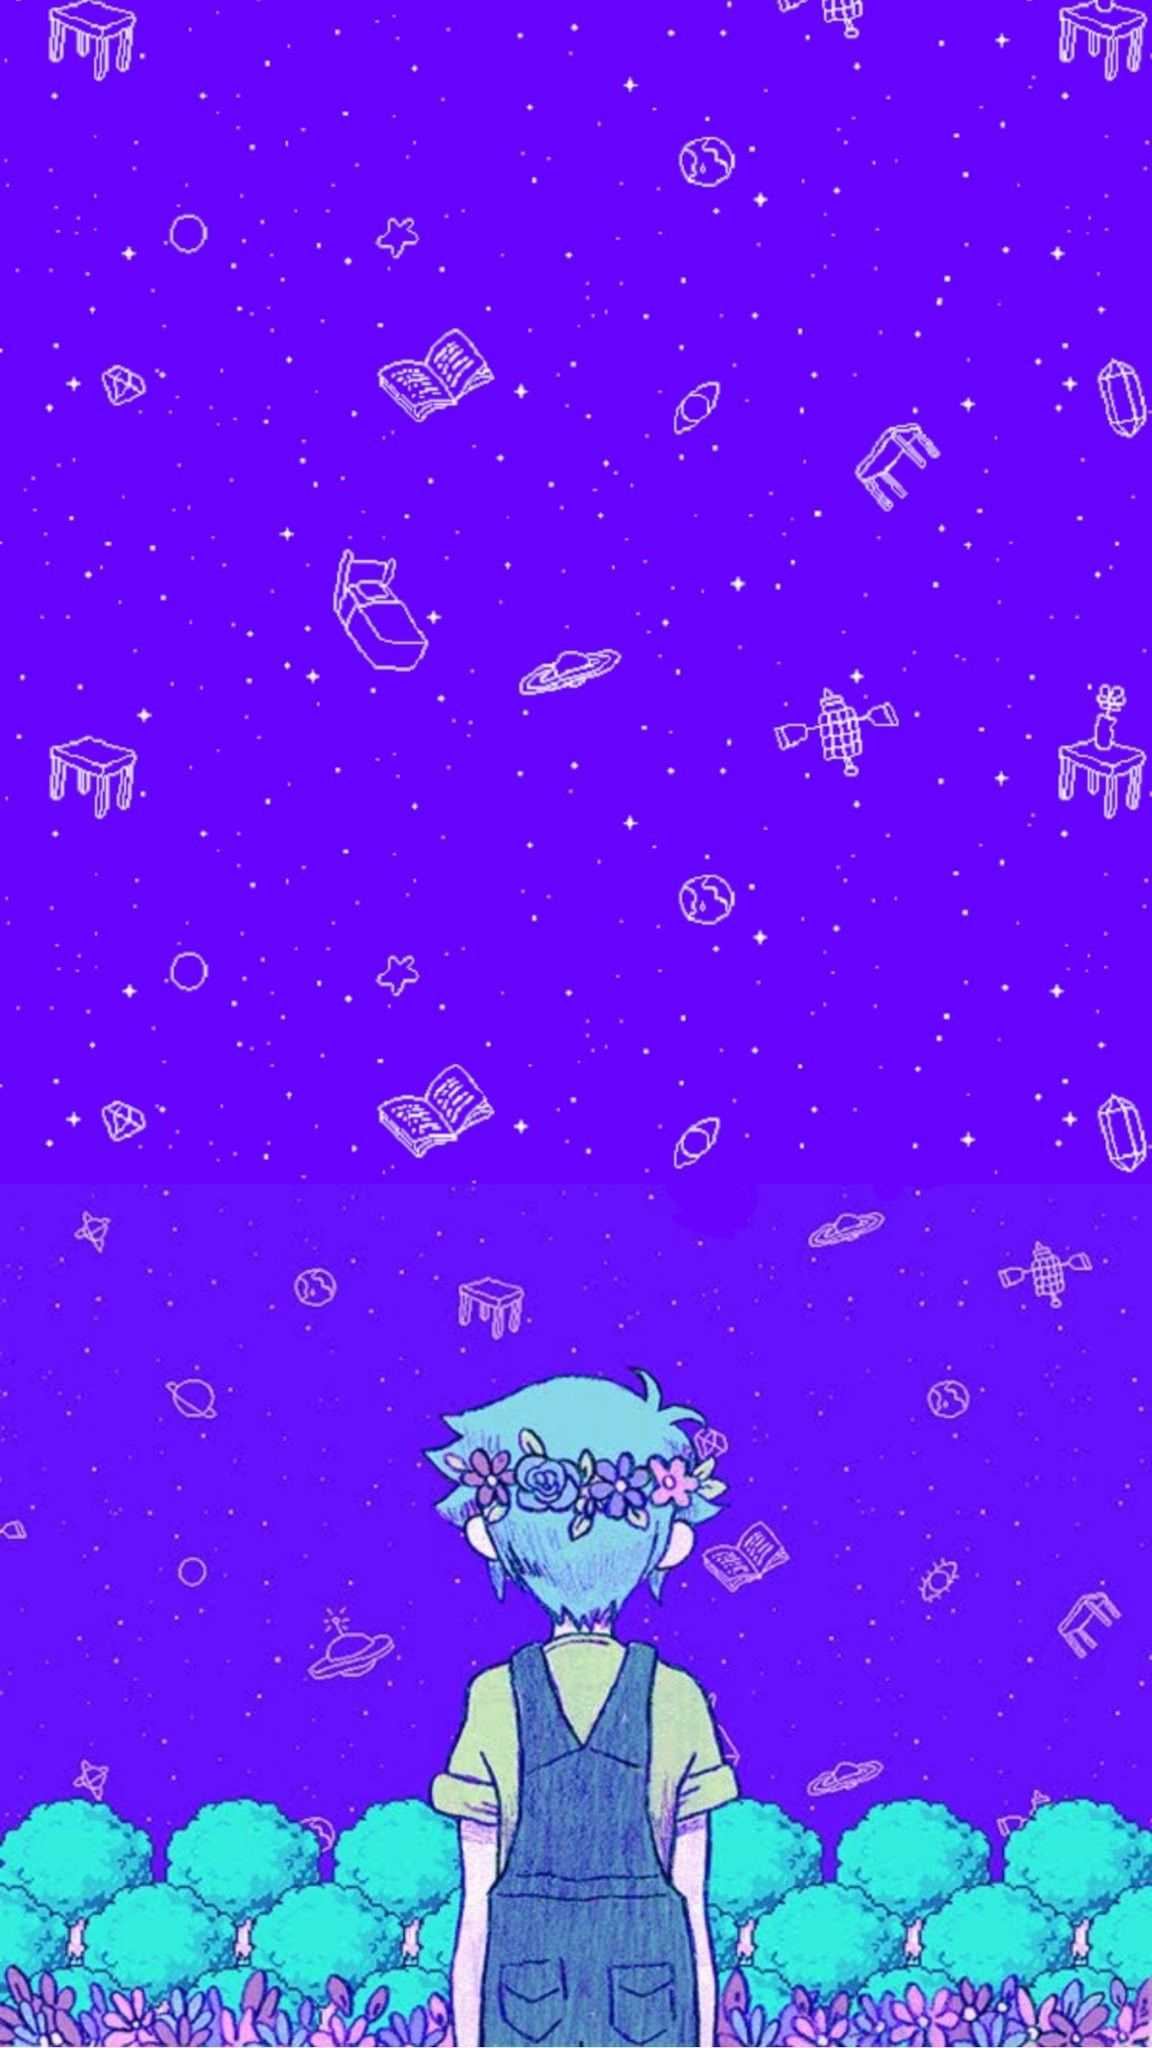 omori free download android